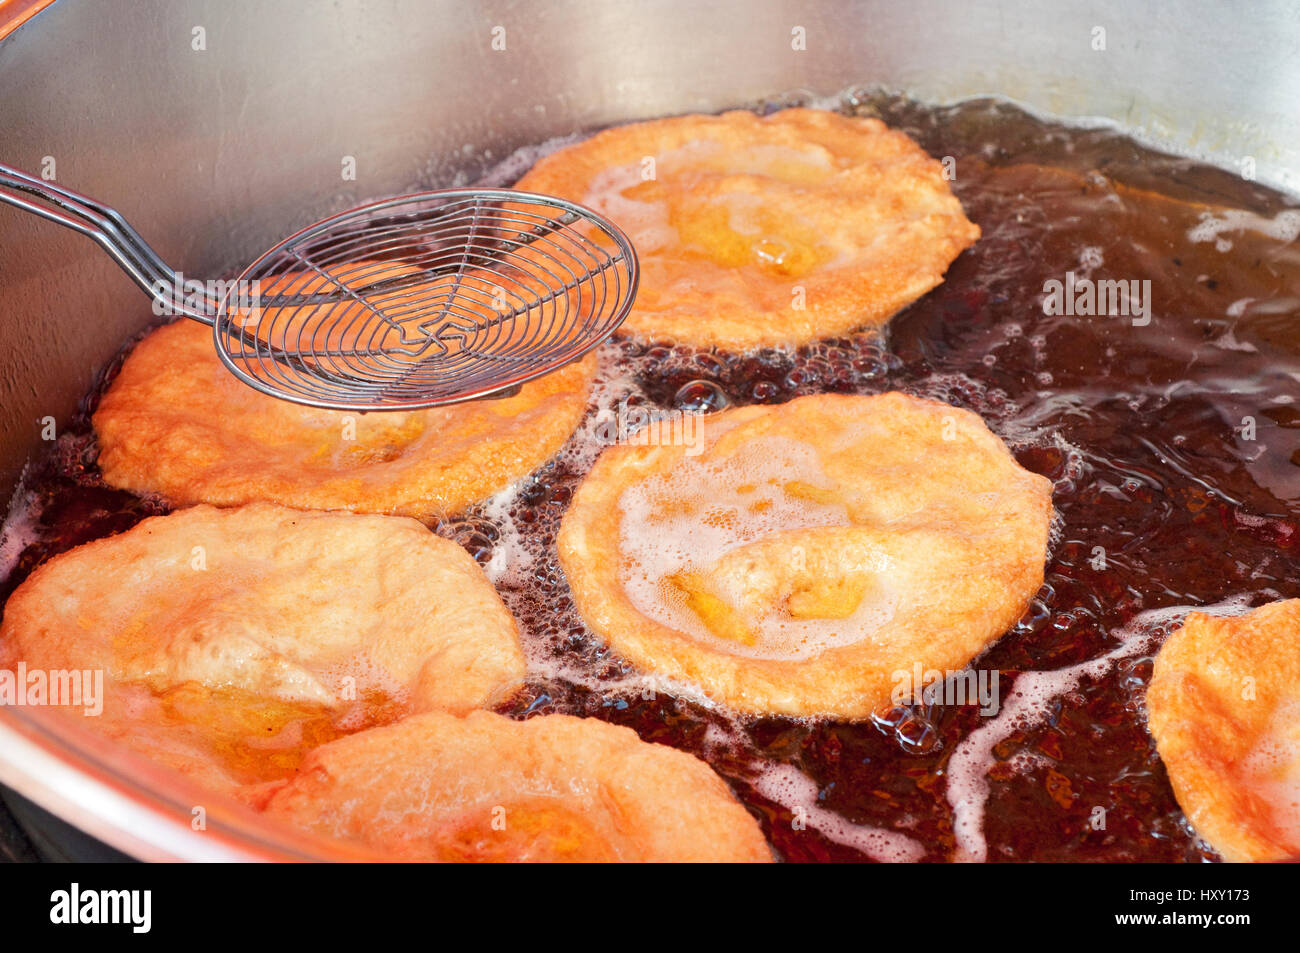 Italy, Lombardy, Street Food, Cooking Fitters Diped in Boiling Oil Stock Photo